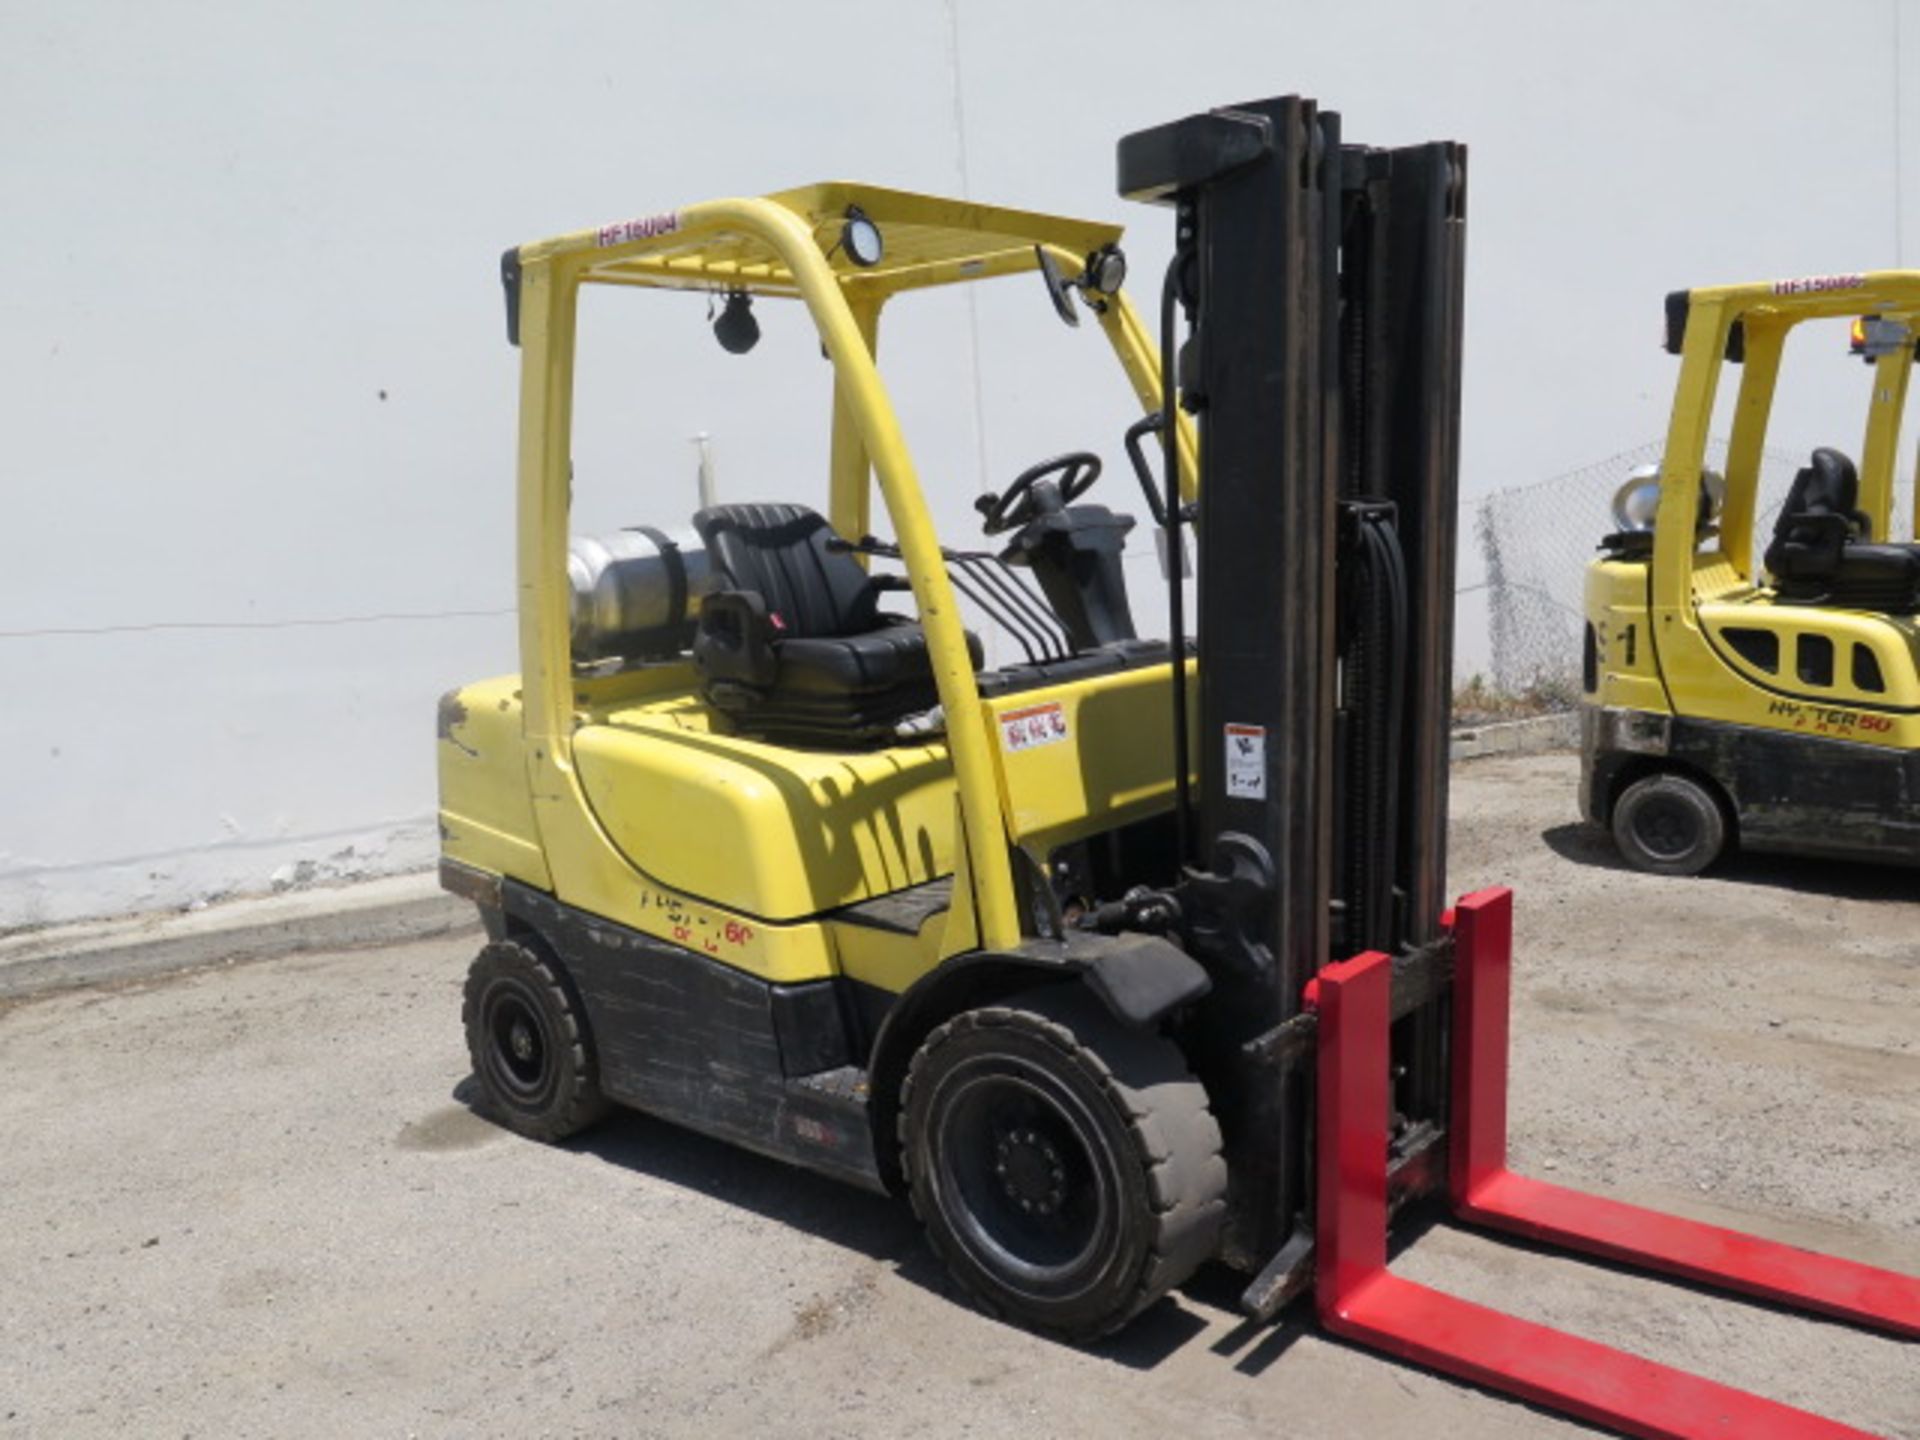 2018 Hyster H60FT 6000 Lb Cap LPG Forklift s/n P177V04957P w/ 3-Stage,182” Lift Height, SOLD AS IS - Image 3 of 21